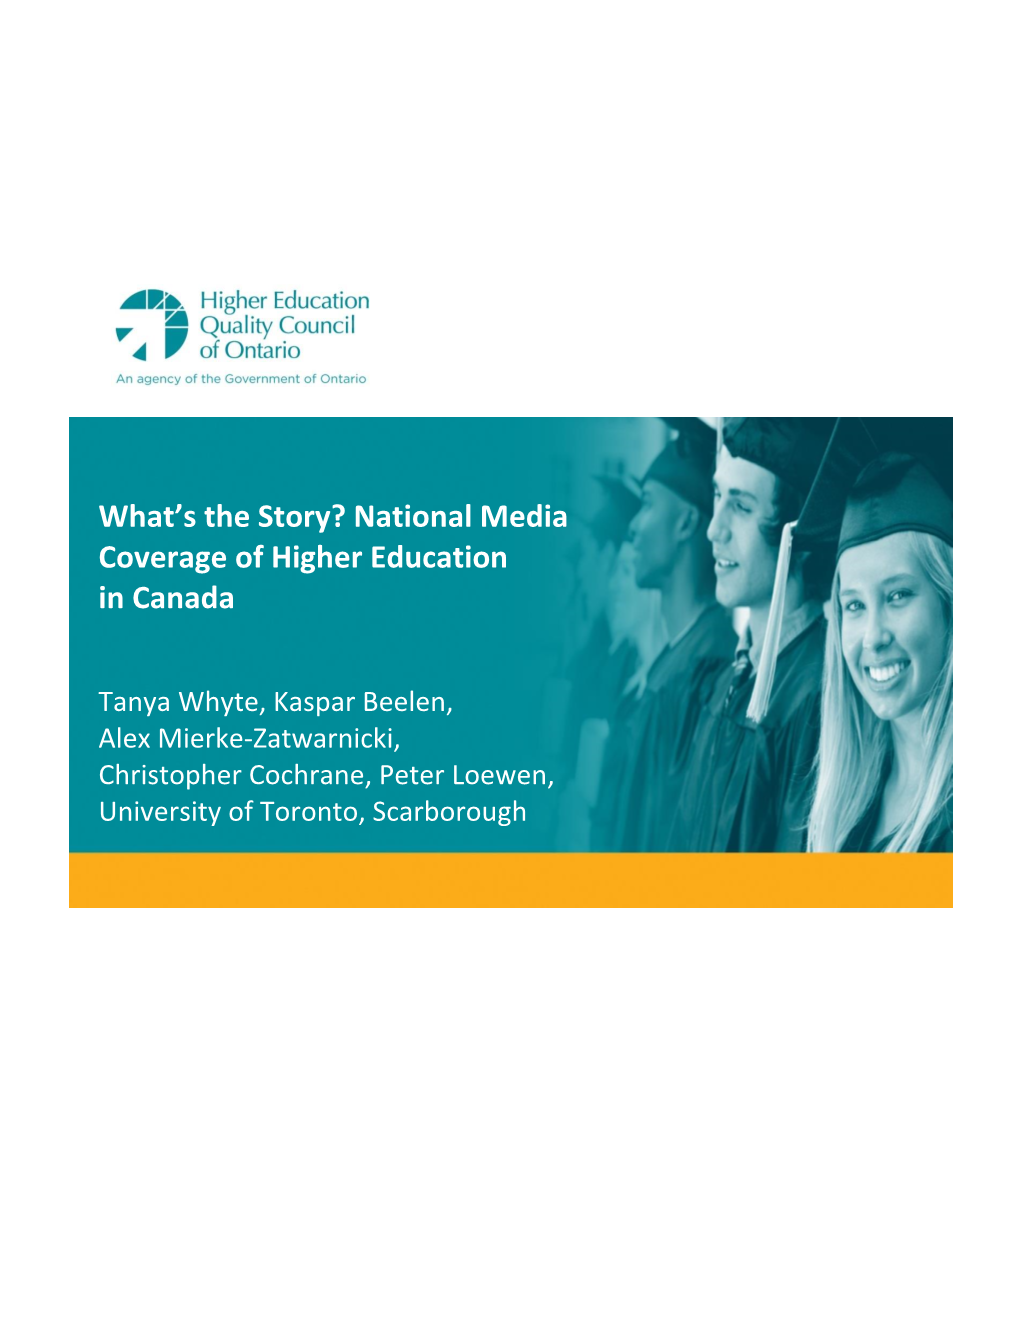 National Media Coverage of Higher Education in Canada